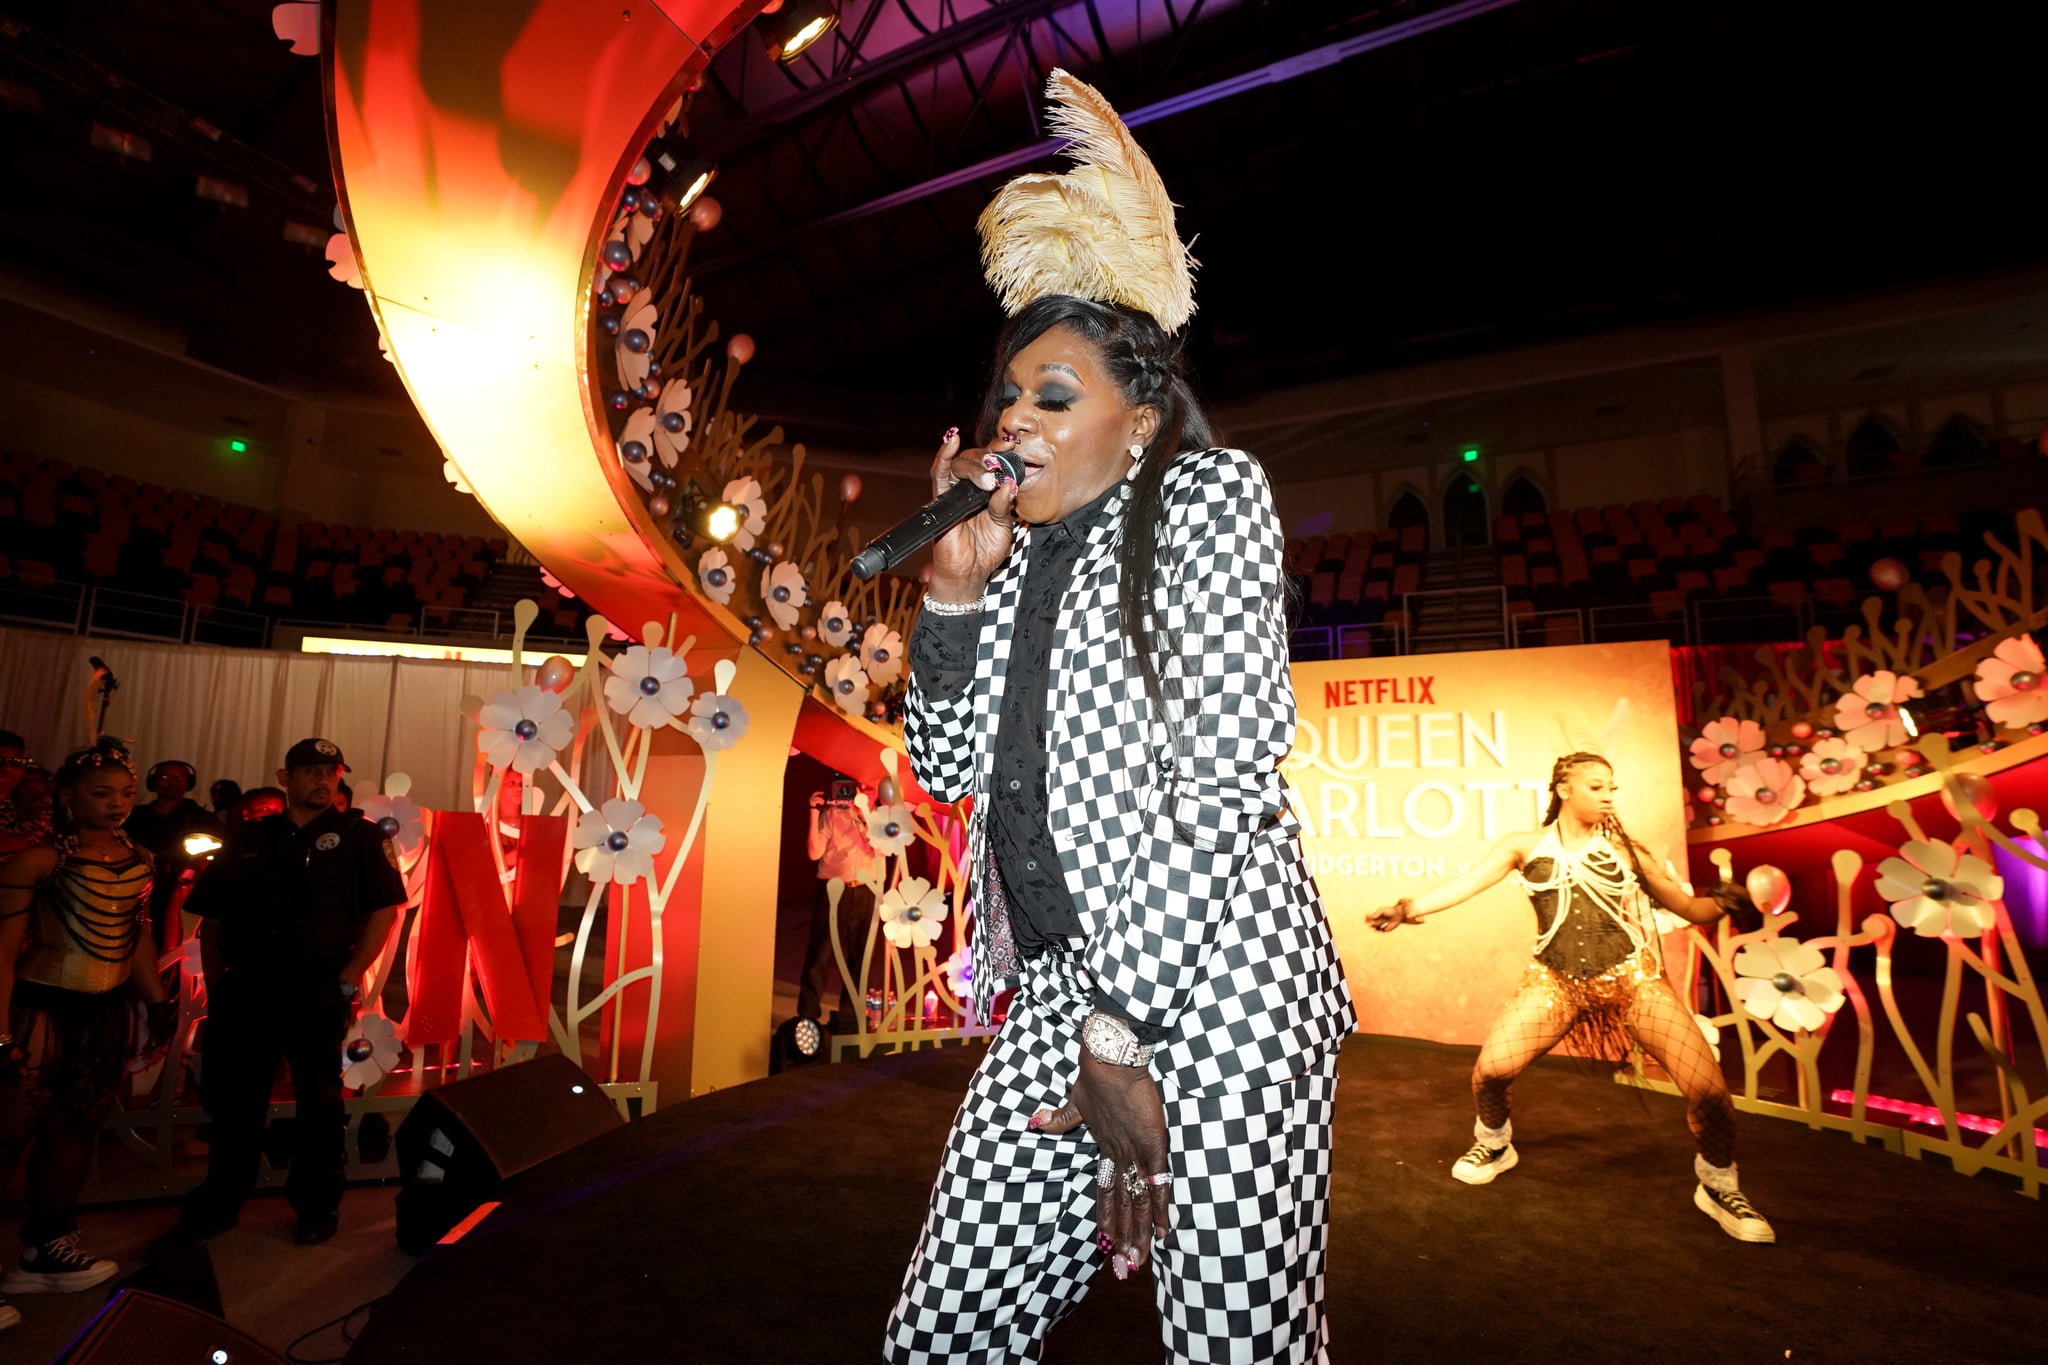 NEW ORLEANS, LOUISIANA - APRIL 15: Big Freedia performs onstage during the Queen Charlotte Spring Waltz at Xavier University on April 15, 2023 in New Orleans, Louisiana. (Photo by Erika Goldring/Getty Images for Netflix)